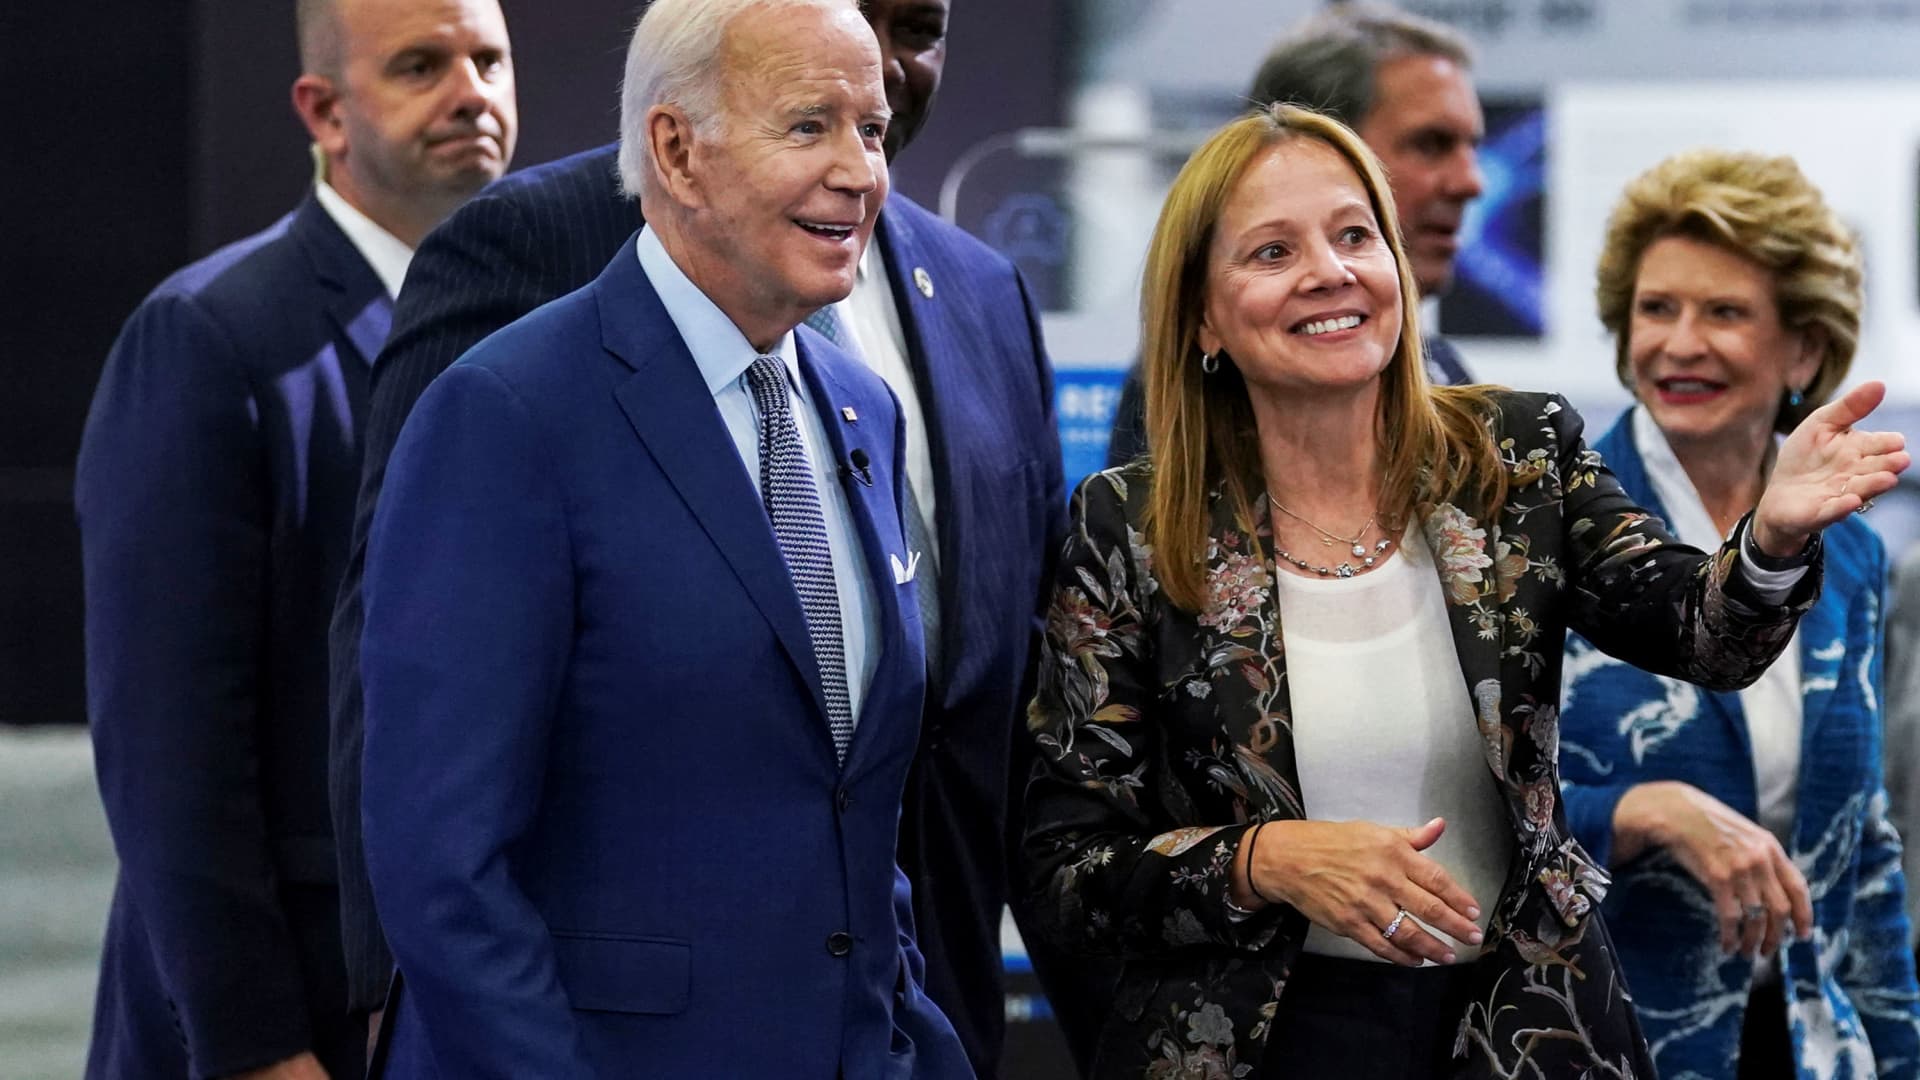 U.S. President Joe Biden listens to General Motors Chief Executive Mary Barra during a visit to the Detroit Auto Show to highlight electric vehicle manufacturing in America, in Detroit, Michigan, September 14, 2022.